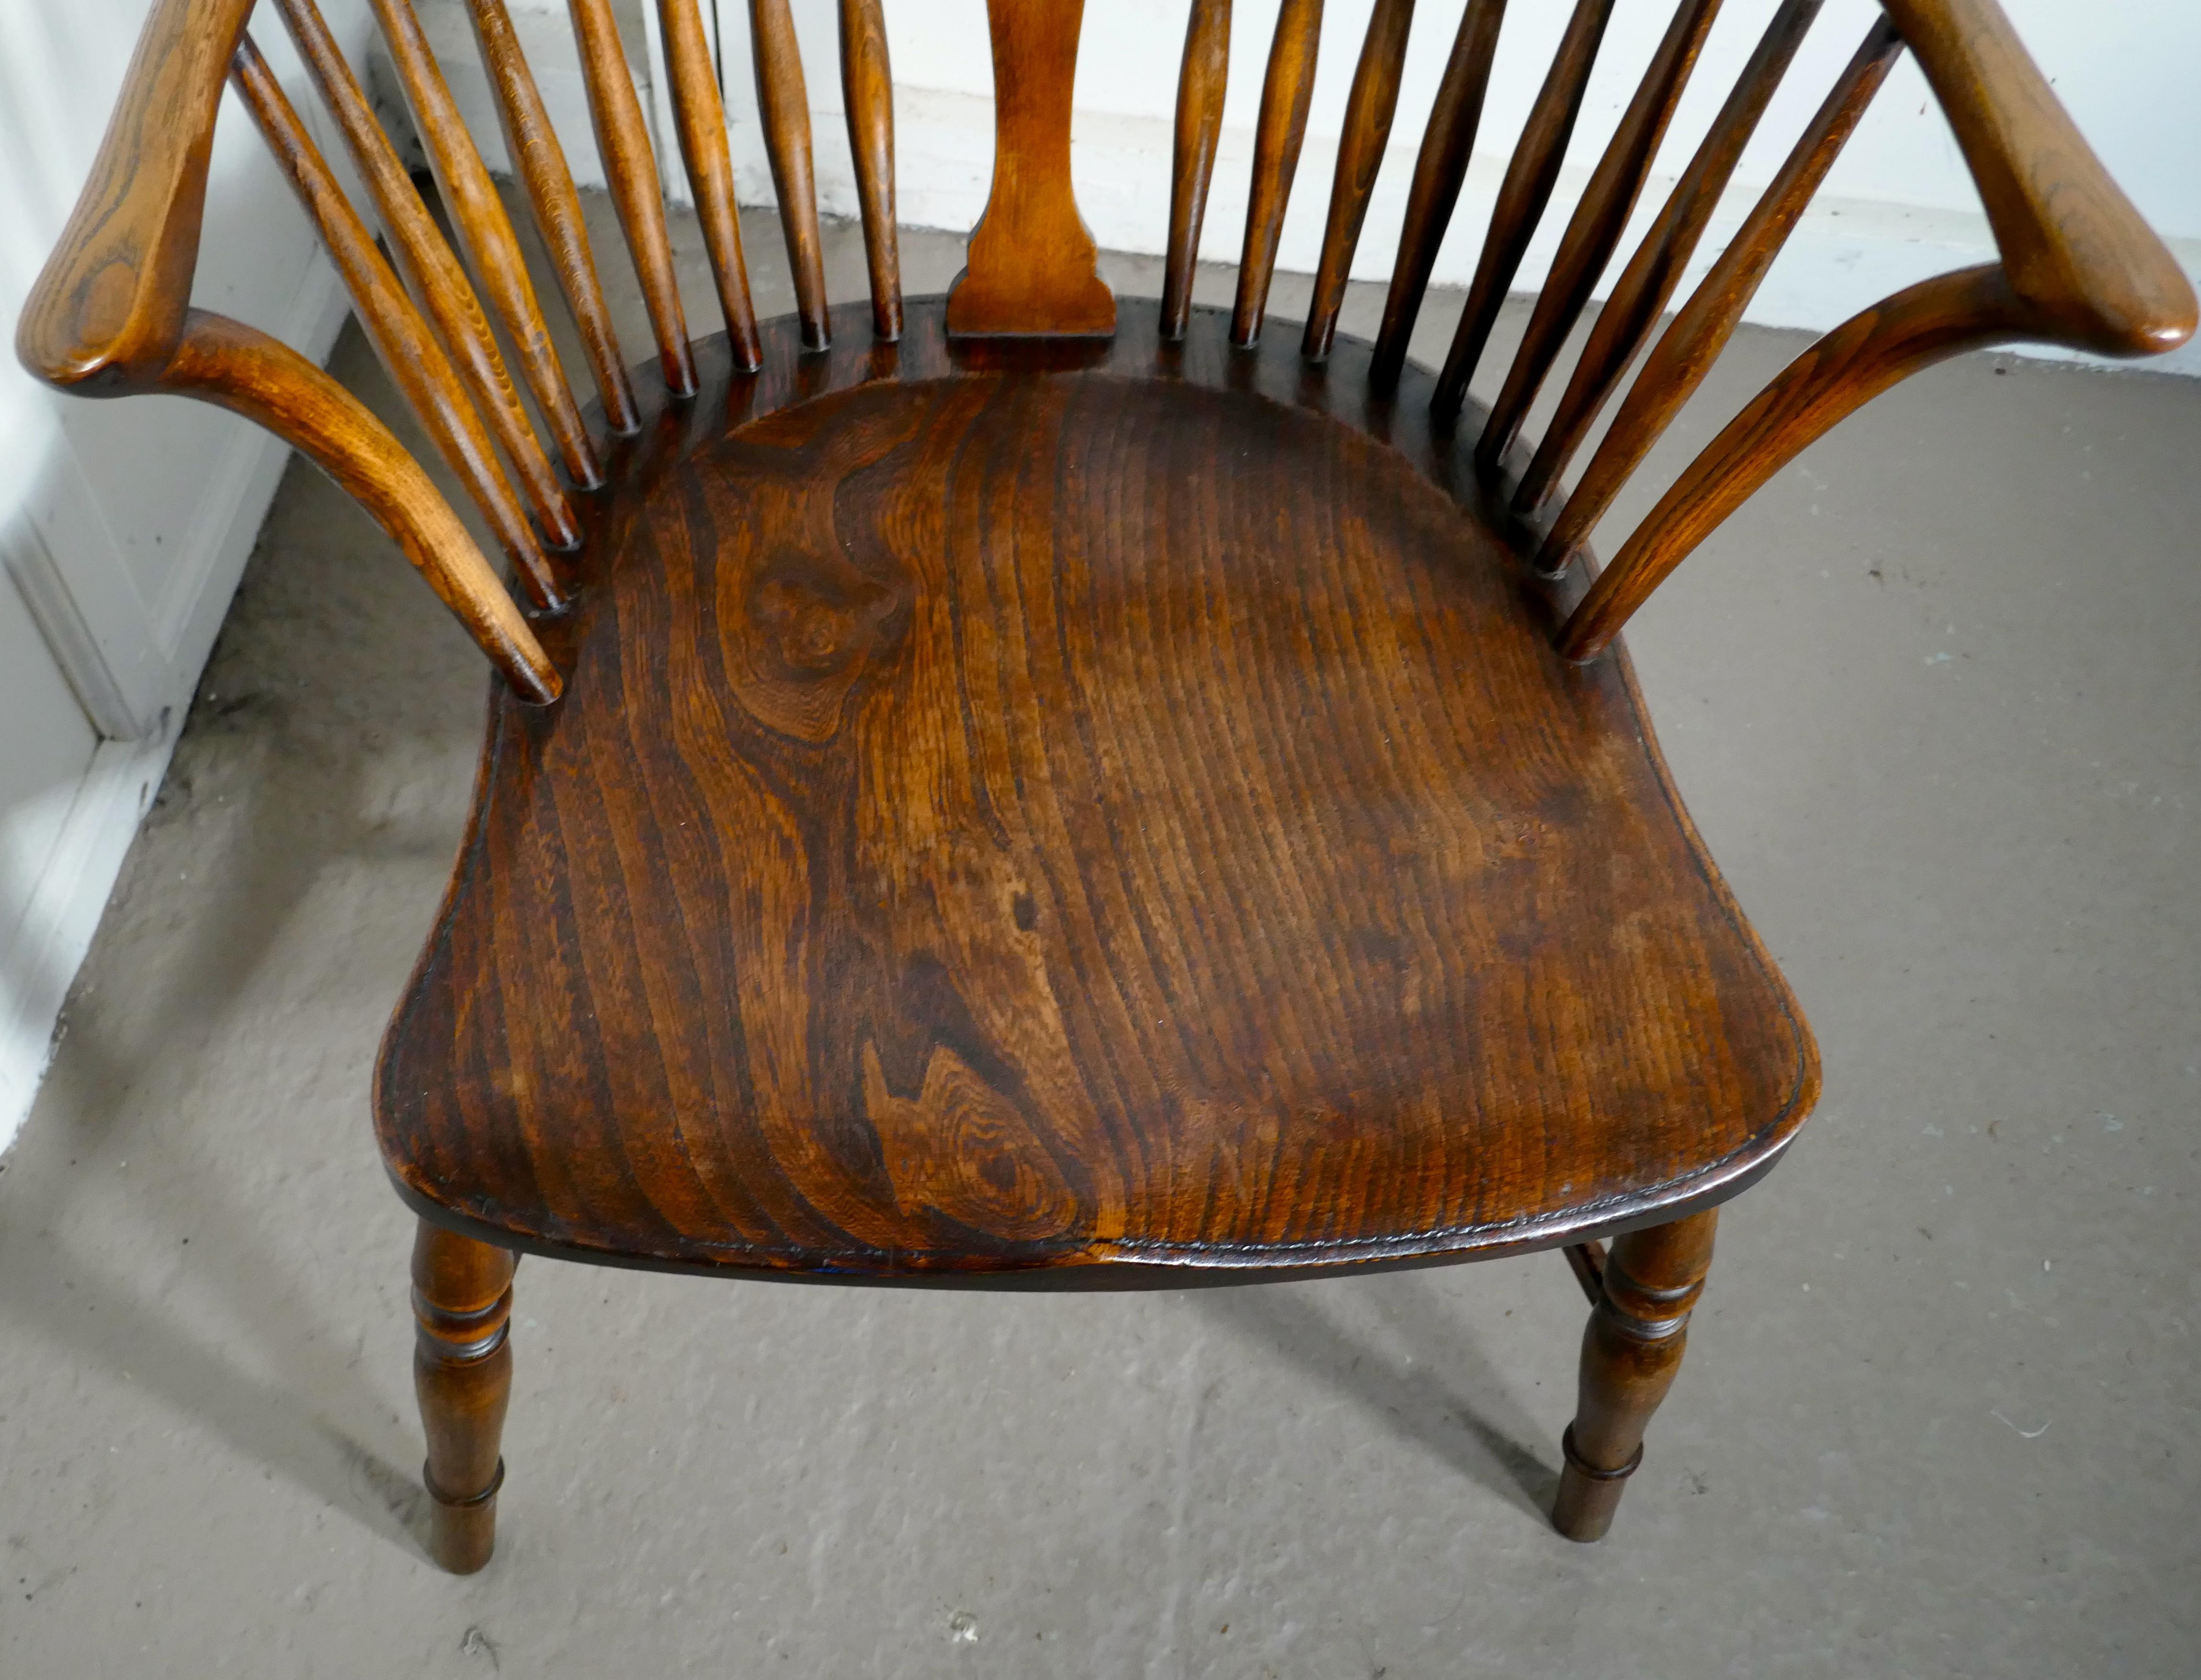 A Georgian elm and ash wheel back windsor carver chair

This is an early 19th century chair made from elm and ash it has a hooped back in the traditional Windsor style, it has a saddle shaped seat and a pierced central splat.
This is a good